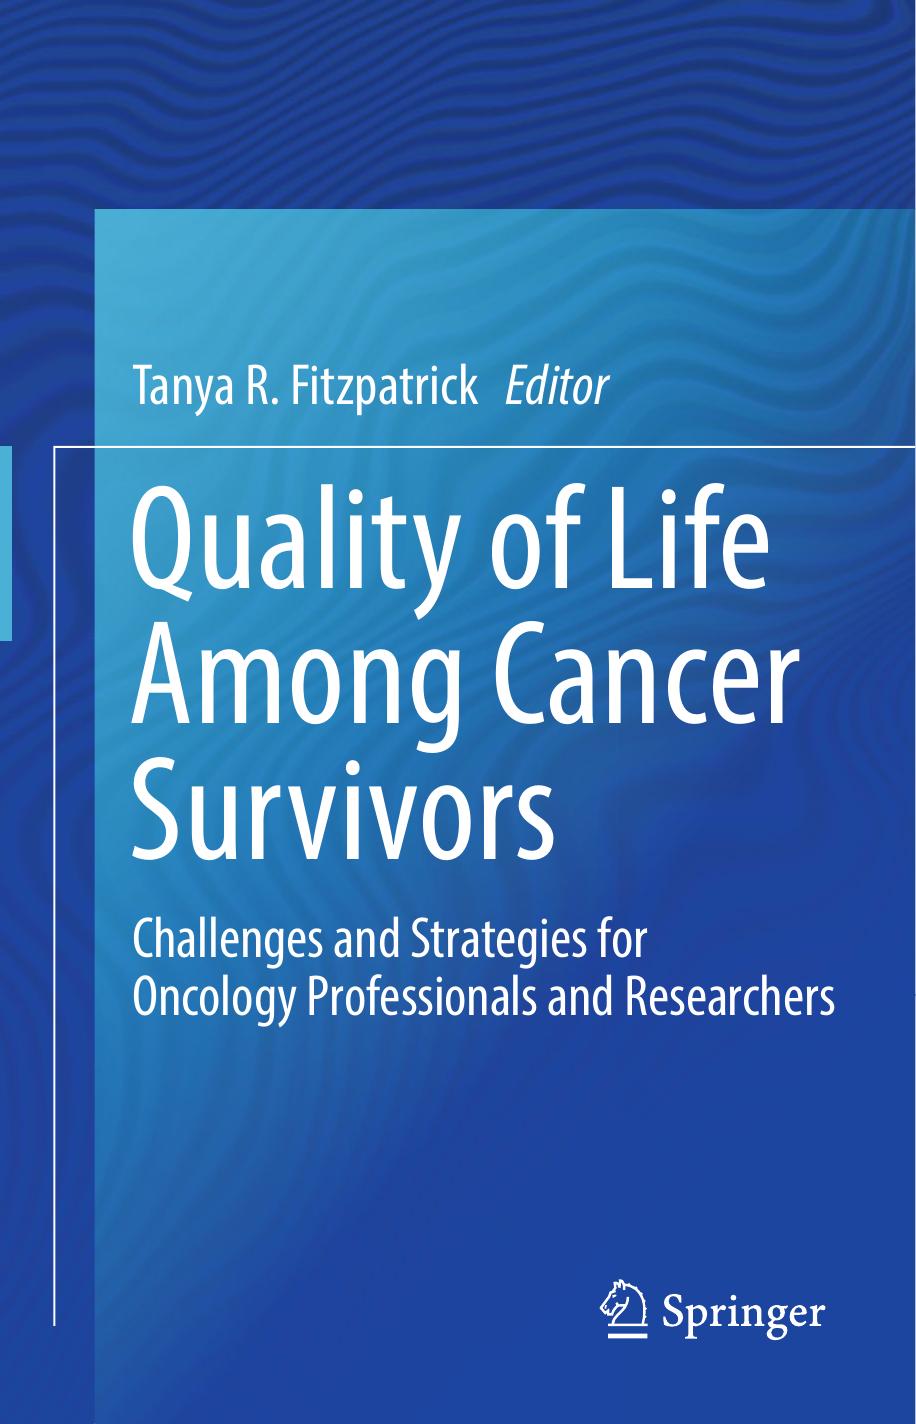 Quality of Life Among Cancer Survivors by Tanya R. Fitzpatrick